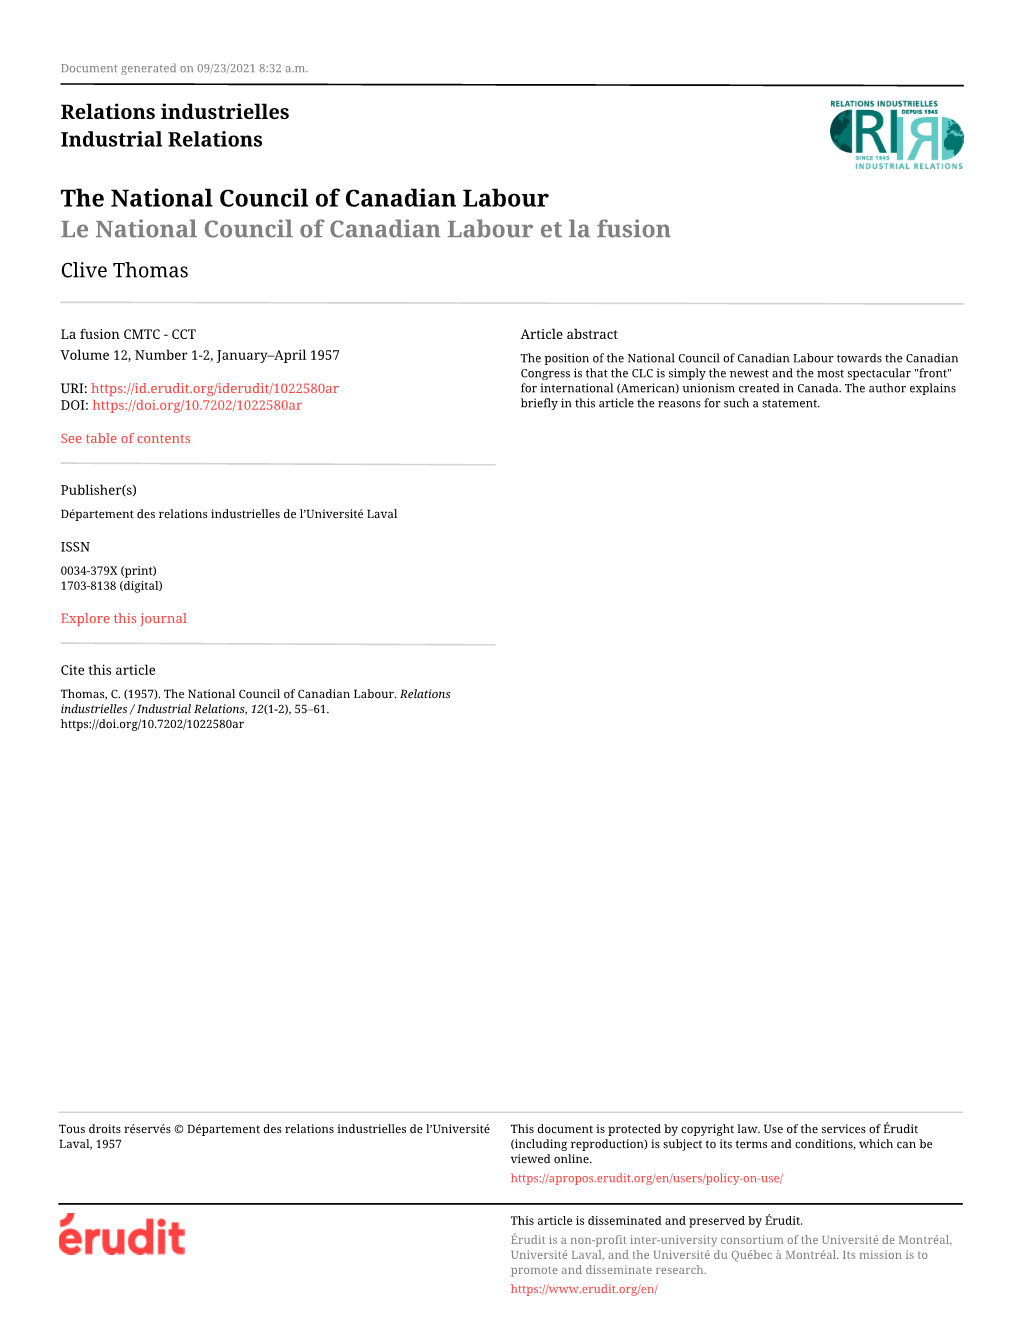 The National Council of Canadian Labour Le National Council of Canadian Labour Et La Fusion Clive Thomas